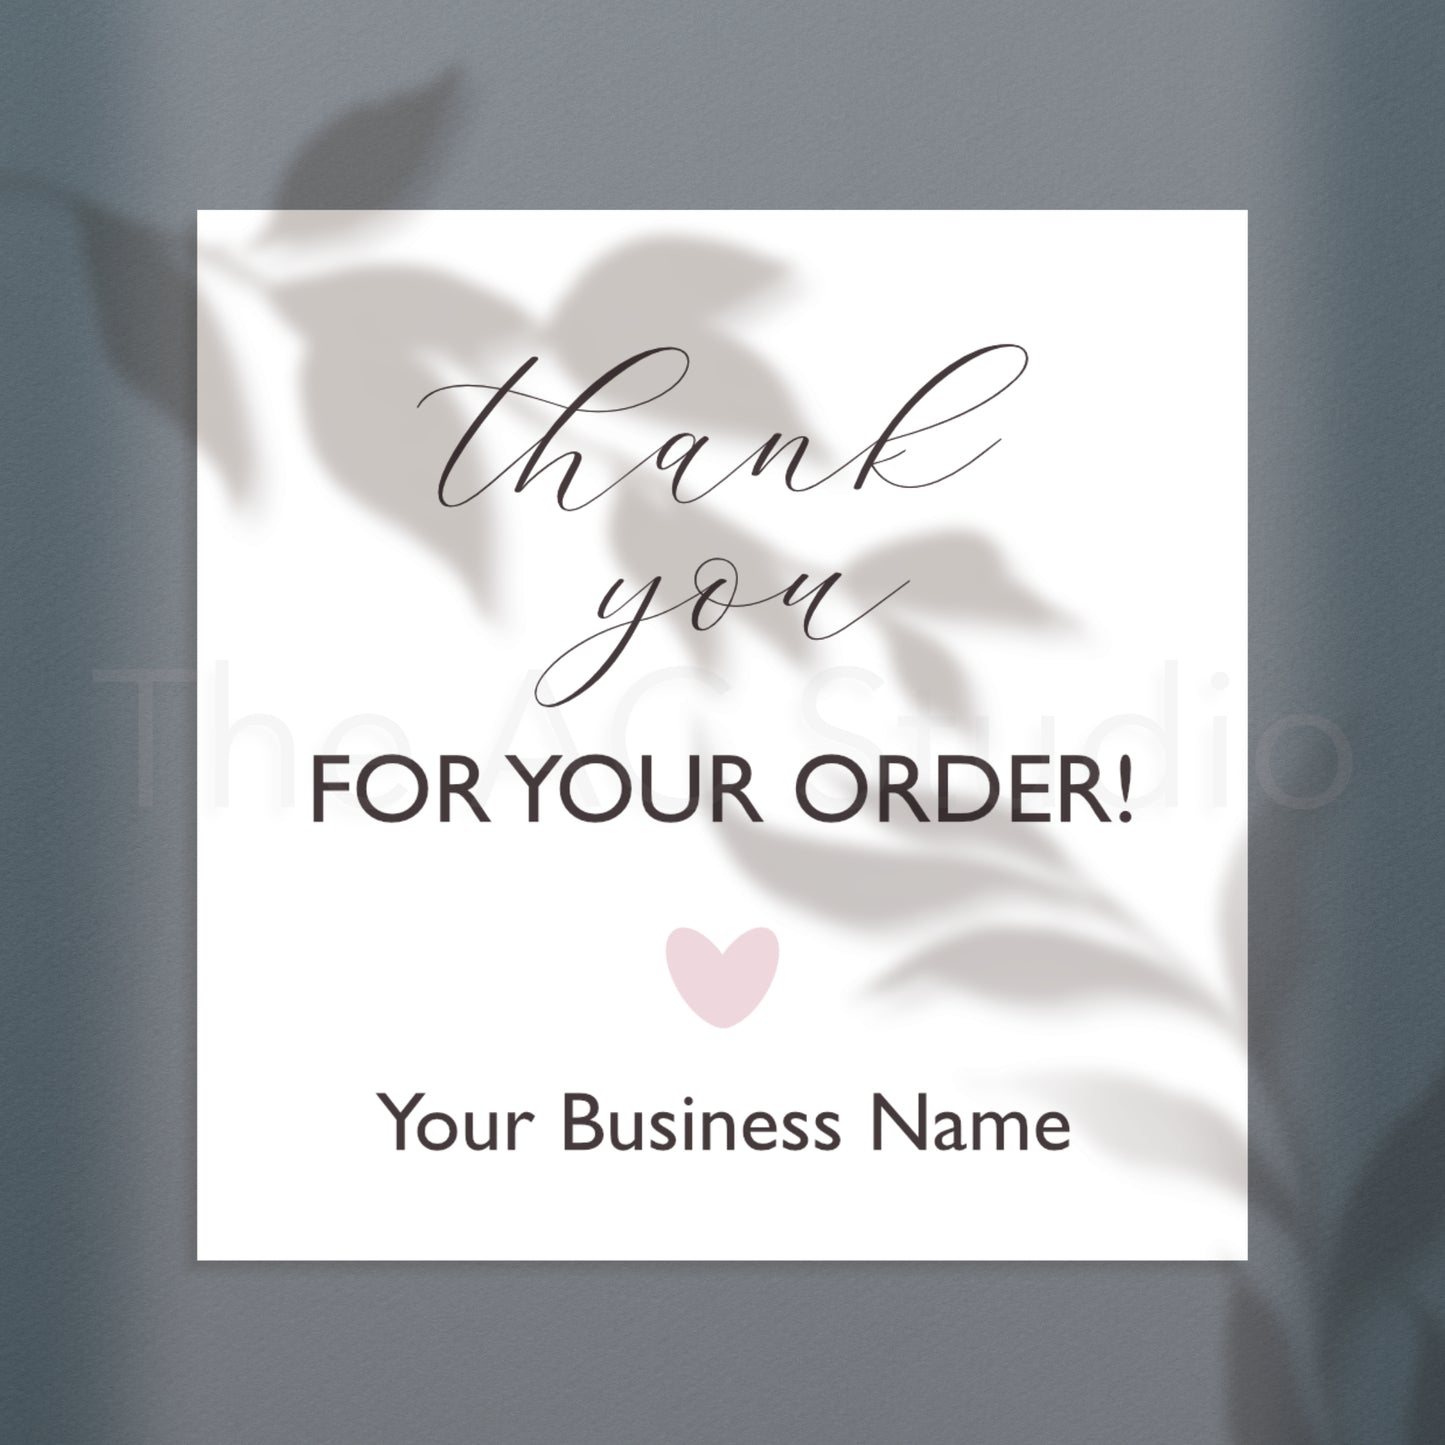 Personalized Square Labels for Your Small Business (Style 2)